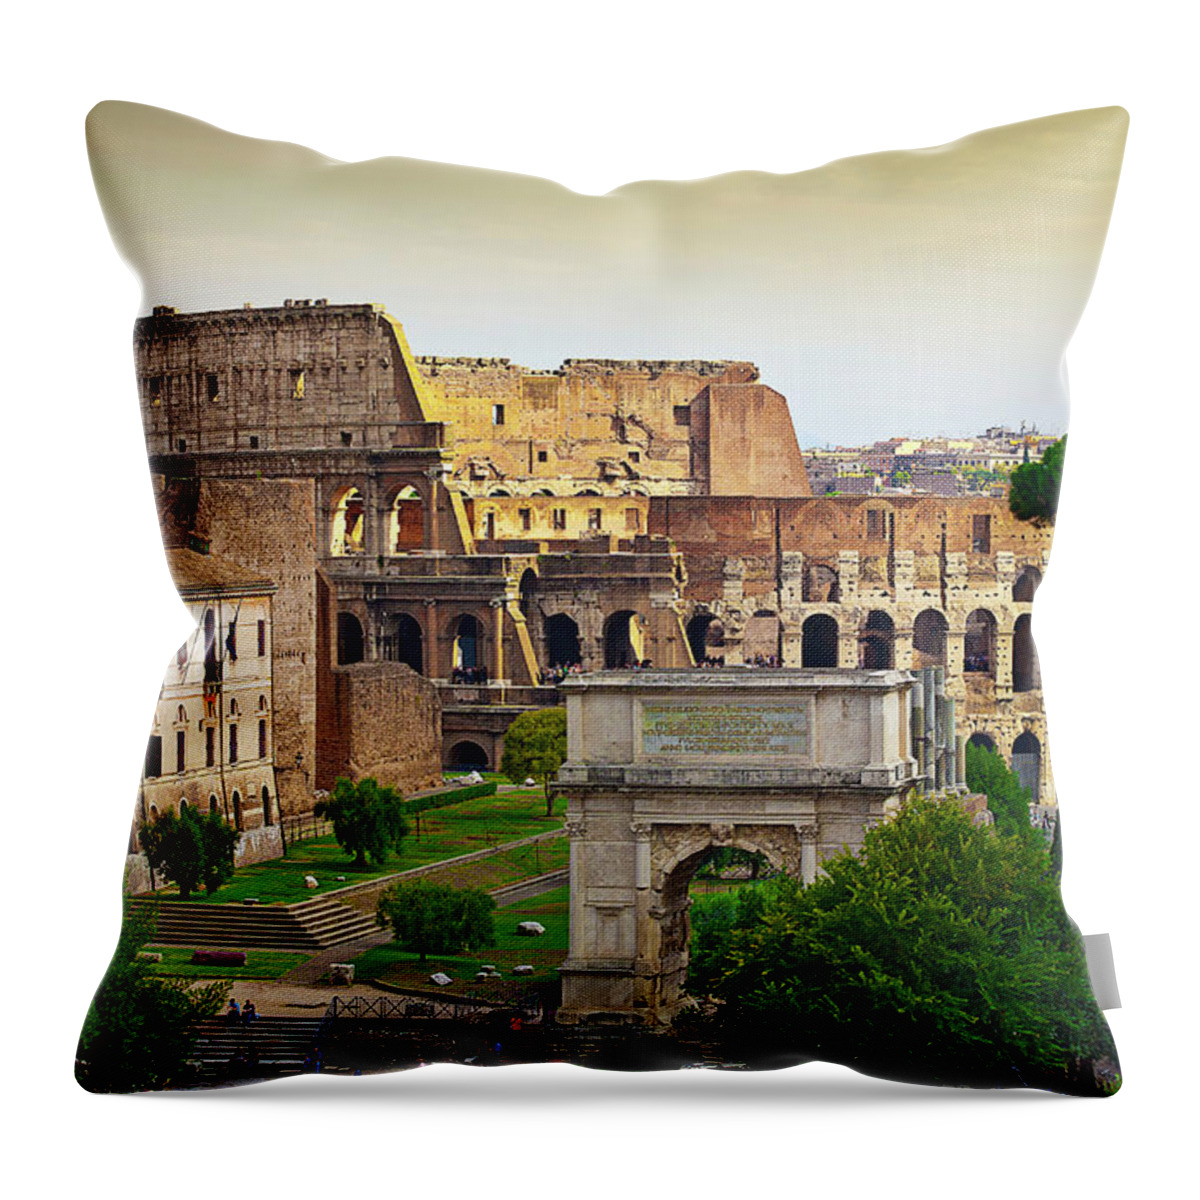 Estock Throw Pillow featuring the digital art Rome, Coliseum And Forum, Italy by Lumiere